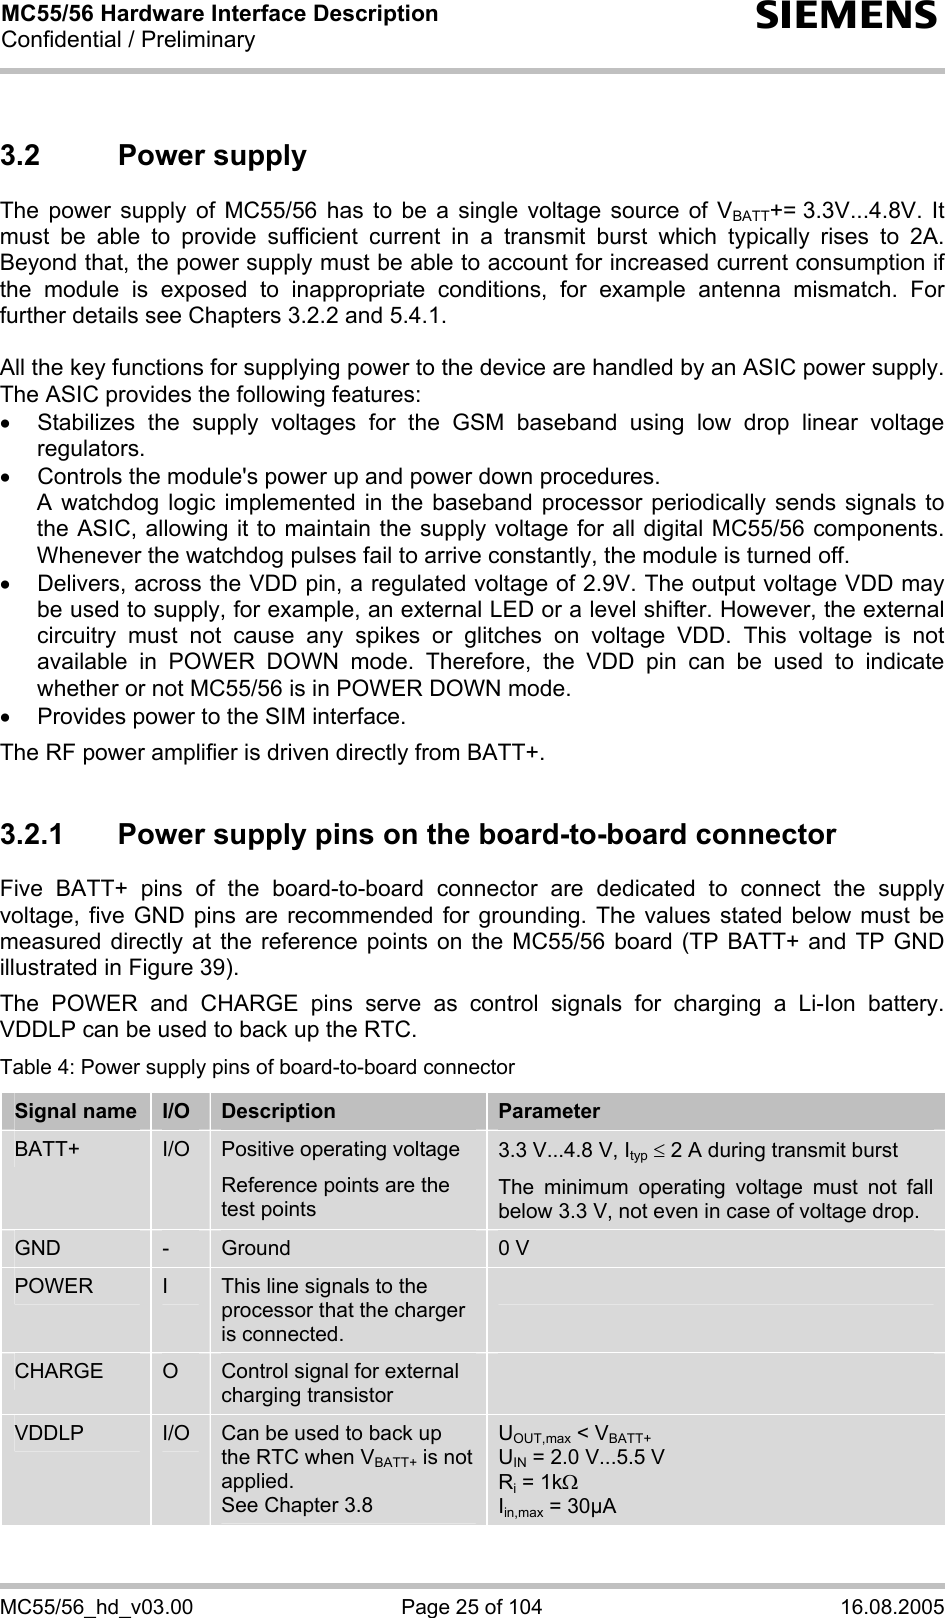 MC55/56 Hardware Interface Description Confidential / Preliminary s MC55/56_hd_v03.00  Page 25 of 104  16.08.2005 3.2 Power supply The power supply of MC55/56 has to be a single voltage source of VBATT+= 3.3V...4.8V.  It must be able to provide sufficient current in a transmit burst which typically rises to 2A. Beyond that, the power supply must be able to account for increased current consumption if the module is exposed to inappropriate conditions, for example antenna mismatch. For further details see Chapters 3.2.2 and 5.4.1.  All the key functions for supplying power to the device are handled by an ASIC power supply. The ASIC provides the following features: • Stabilizes the supply voltages for the GSM baseband using low drop linear voltage regulators.  •  Controls the module&apos;s power up and power down procedures.  A watchdog logic implemented in the baseband processor periodically sends signals to the ASIC, allowing it to maintain the supply voltage for all digital MC55/56 components. Whenever the watchdog pulses fail to arrive constantly, the module is turned off.  •  Delivers, across the VDD pin, a regulated voltage of 2.9V. The output voltage VDD may be used to supply, for example, an external LED or a level shifter. However, the external circuitry must not cause any spikes or glitches on voltage VDD. This voltage is not available in POWER DOWN mode. Therefore, the VDD pin can be used to indicate whether or not MC55/56 is in POWER DOWN mode. •  Provides power to the SIM interface.  The RF power amplifier is driven directly from BATT+.  3.2.1  Power supply pins on the board-to-board connector Five BATT+ pins of the board-to-board connector are dedicated to connect the supply voltage, five GND pins are recommended for grounding. The values stated below must be measured directly at the reference points on the MC55/56 board (TP BATT+ and TP GND illustrated in Figure 39).  The POWER and CHARGE pins serve as control signals for charging a Li-Ion battery. VDDLP can be used to back up the RTC.  Table 4: Power supply pins of board-to-board connector Signal name  I/O  Description  Parameter BATT+  I/O  Positive operating voltage Reference points are the test points  3.3 V...4.8 V, Ityp ≤ 2 A during transmit burst The minimum operating voltage must not fall below 3.3 V, not even in case of voltage drop. GND  -  Ground  0 V POWER  I  This line signals to the processor that the charger is connected.  CHARGE  O  Control signal for external charging transistor  VDDLP  I/O  Can be used to back up the RTC when VBATT+ is not applied.  See Chapter 3.8 UOUT,max &lt; VBATT+ UIN = 2.0 V...5.5 V Ri = 1kΩ Iin,max = 30µA  